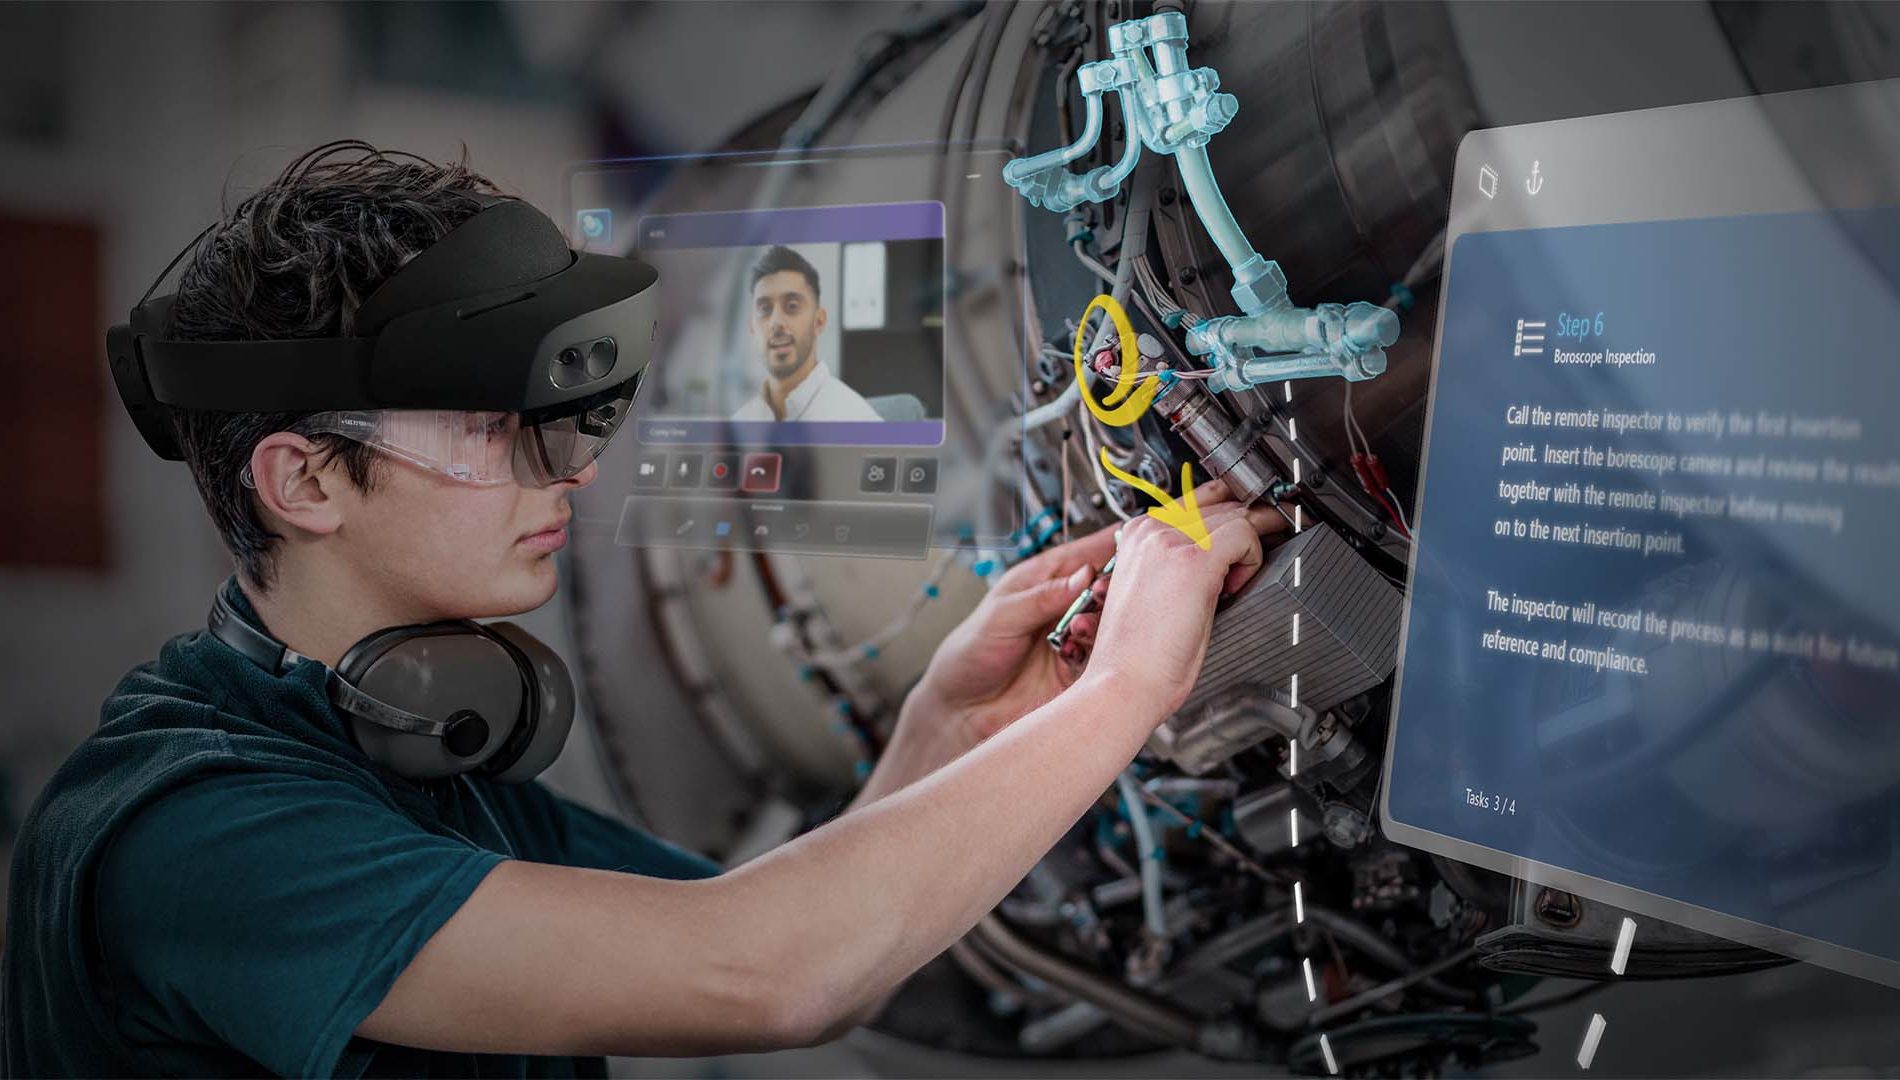 What All Can HoloLens Do